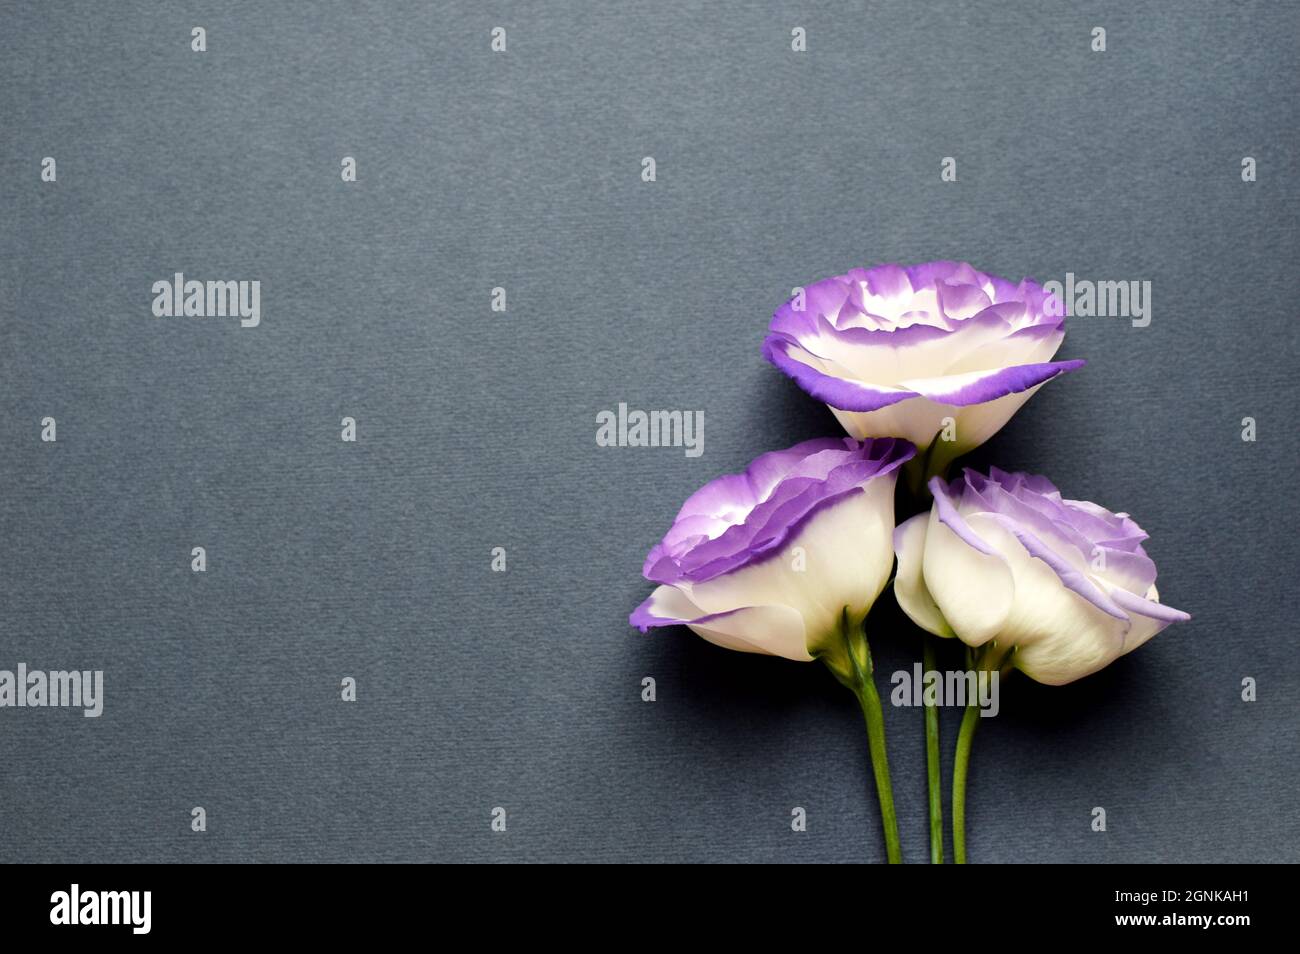 Beautiful white-purple eustoma (lisianthus) flowers in full bloom. Bouquet of flowers on a grey background. Stock Photo